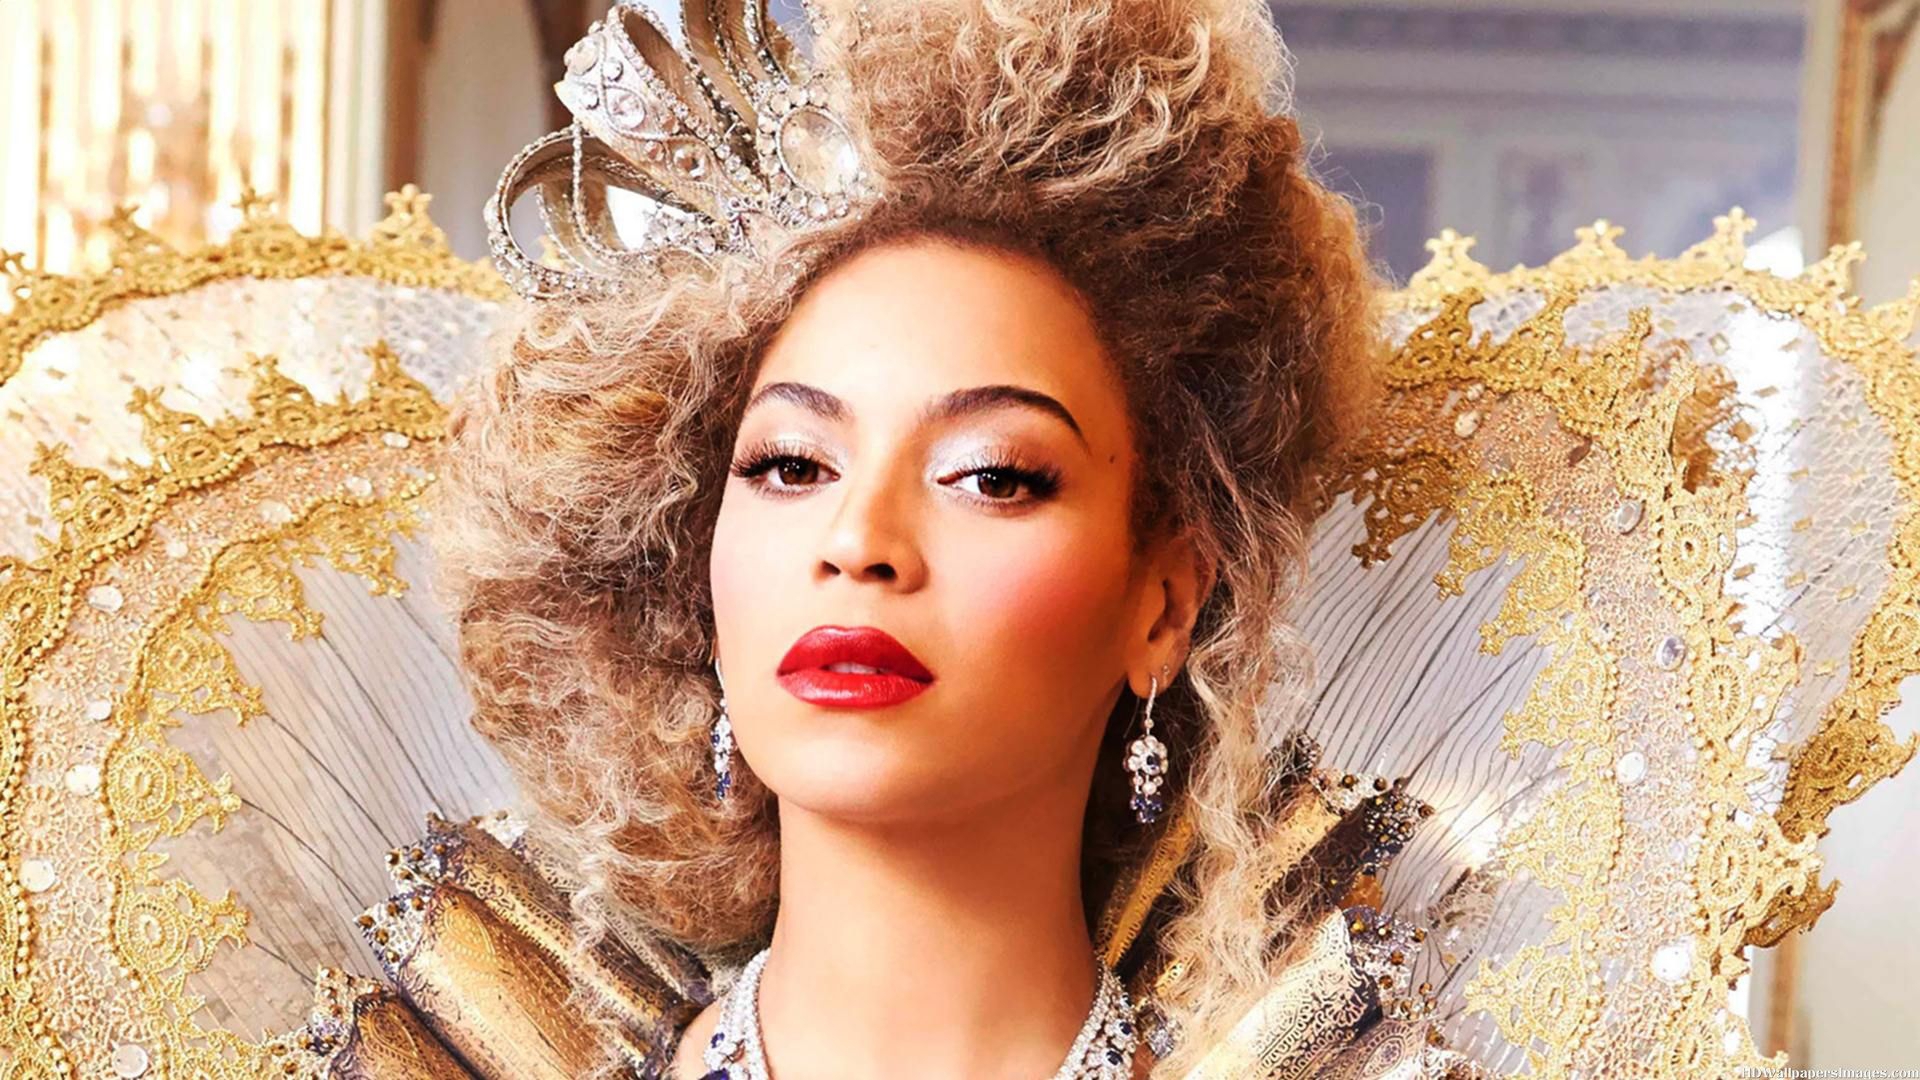 Beyonce Knowles Wallpaper Image Photos Pictures Background